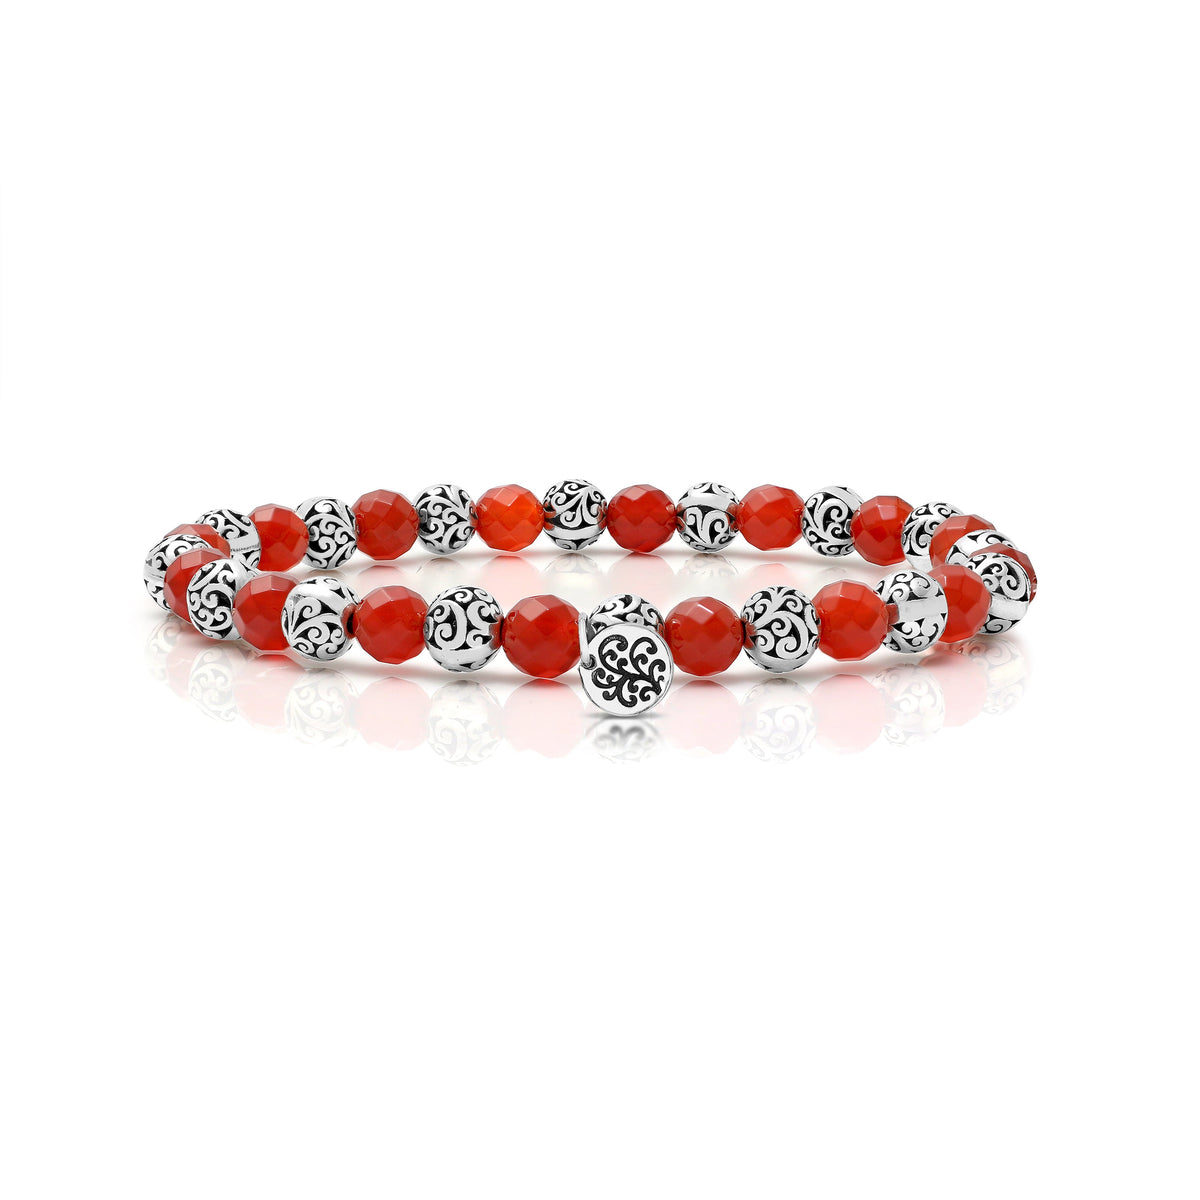 6 mm LH Signature Scroll and Red Carnelian Alternated Beads Stretch Bracelet